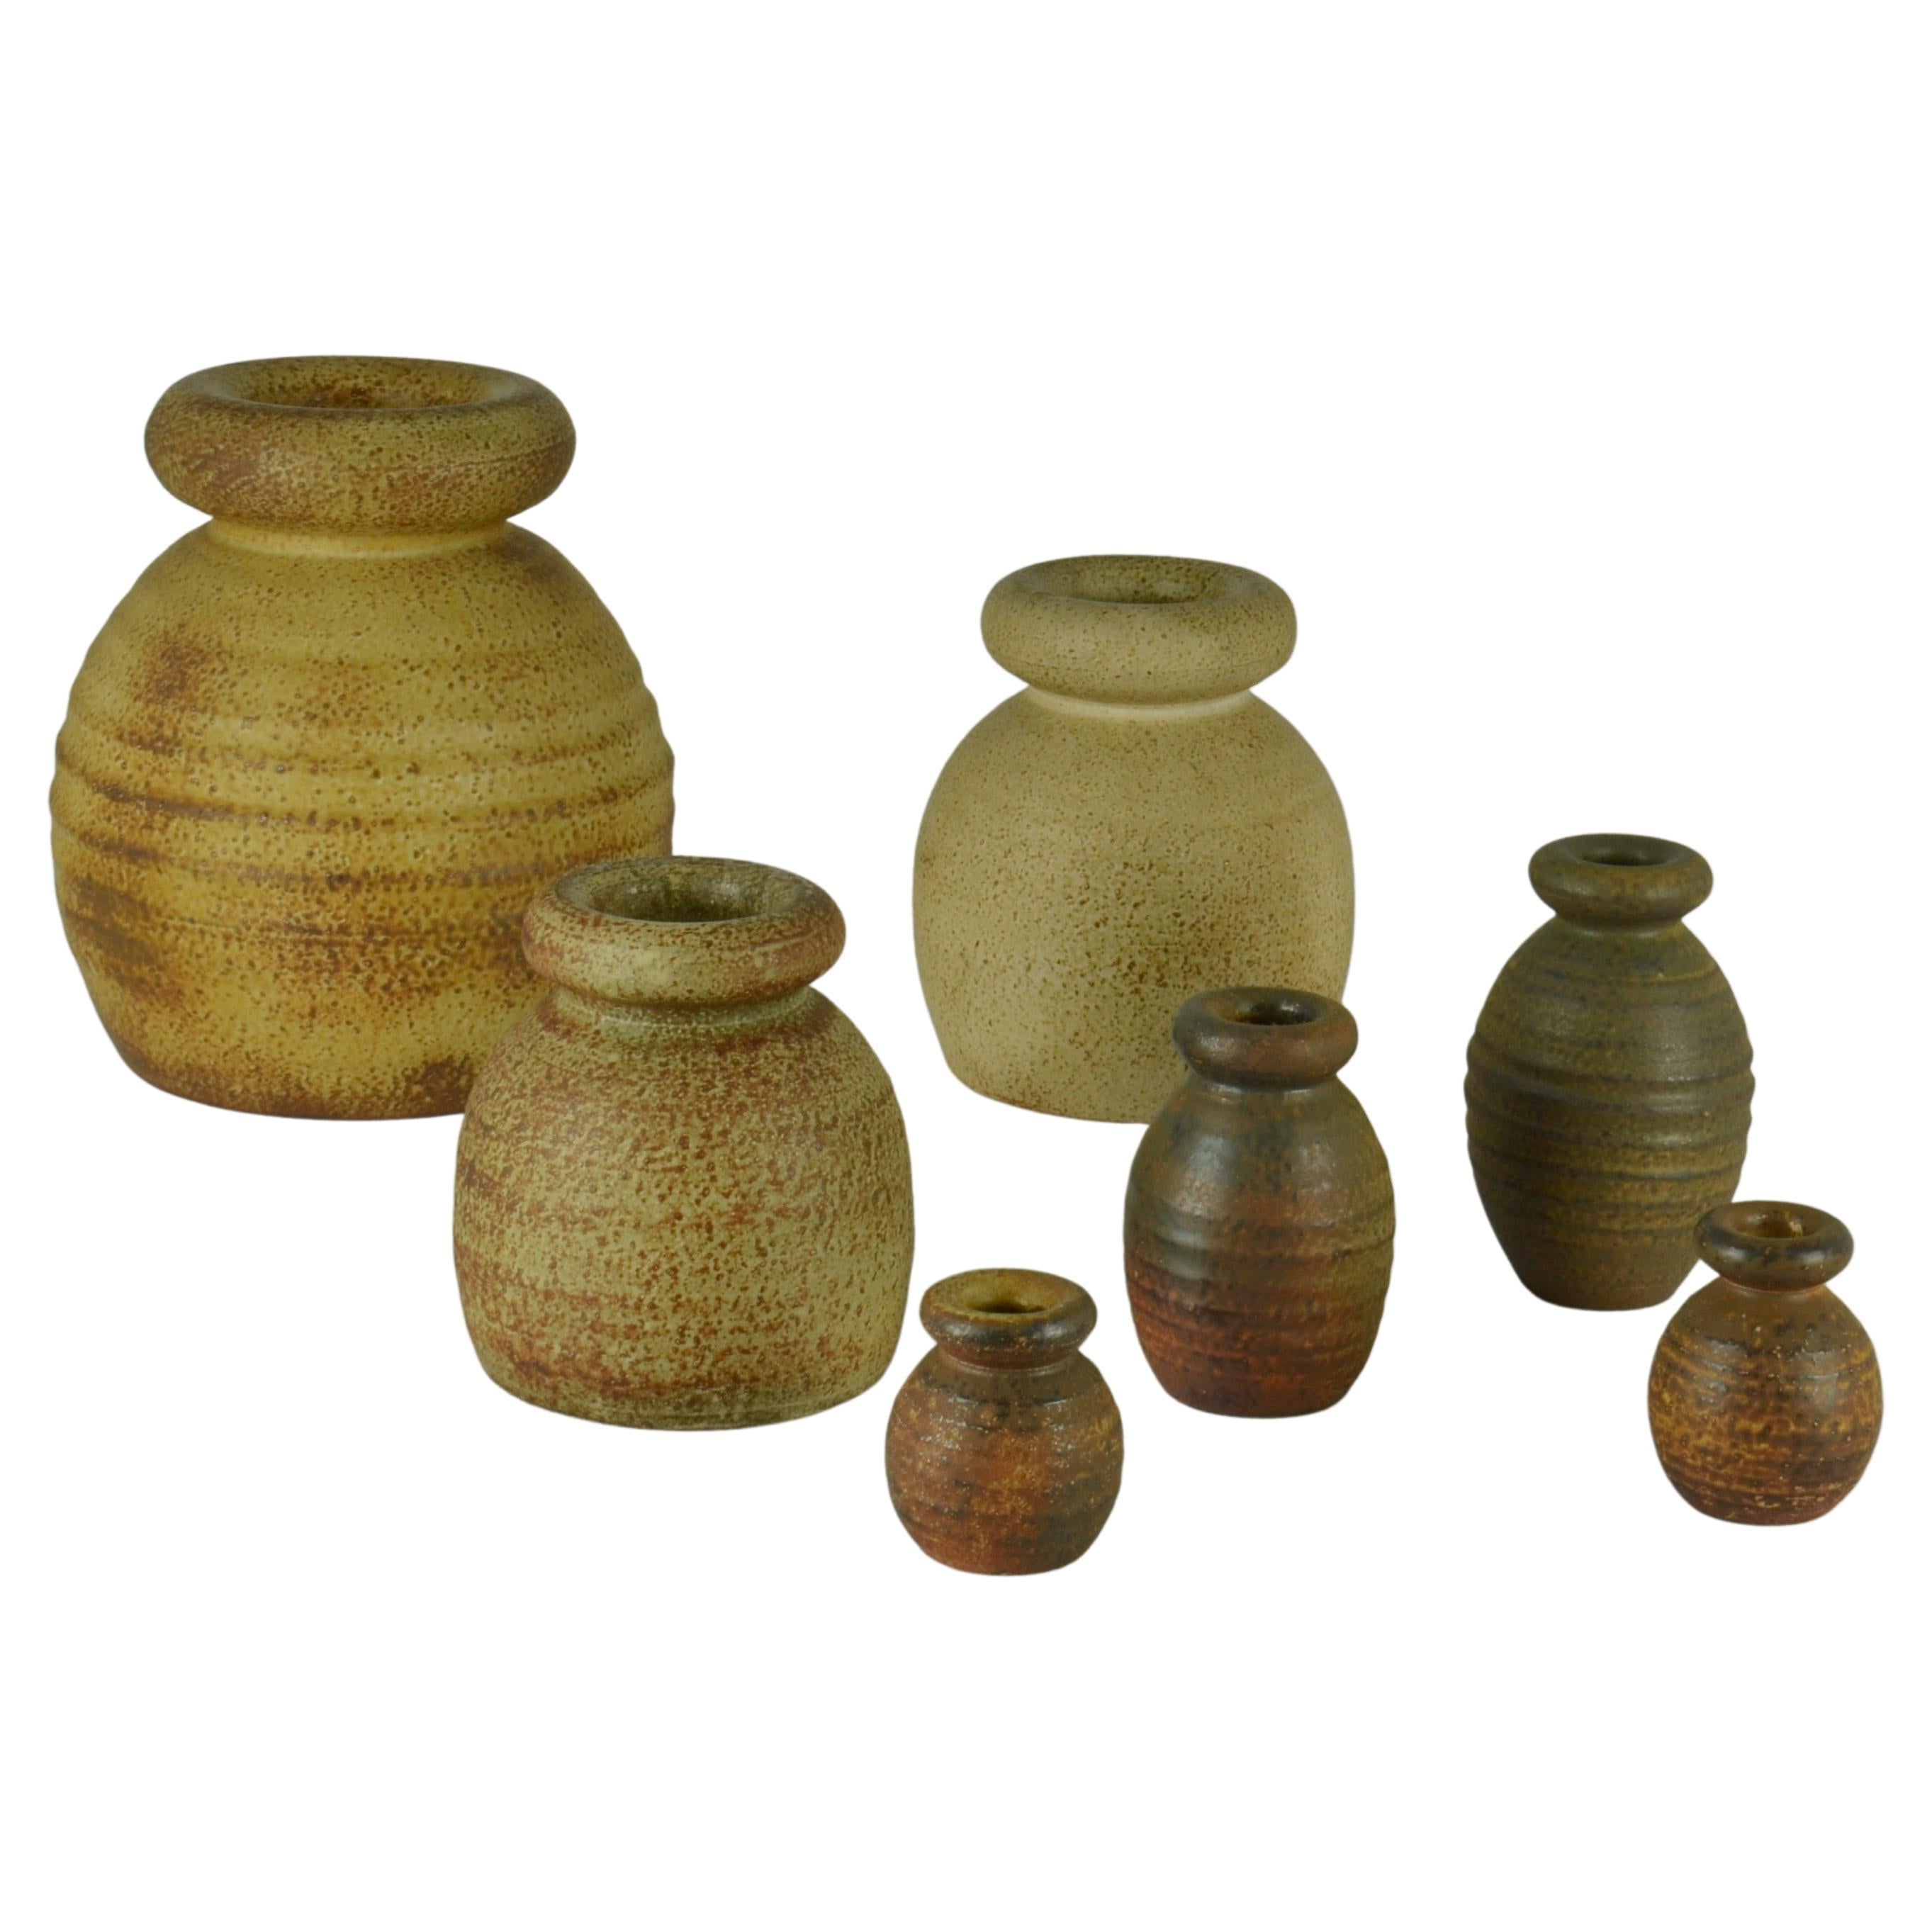 Group of Bulbous Studio Ceramic Vases with Rolled in Earth Tones by Piet Knepper For Sale